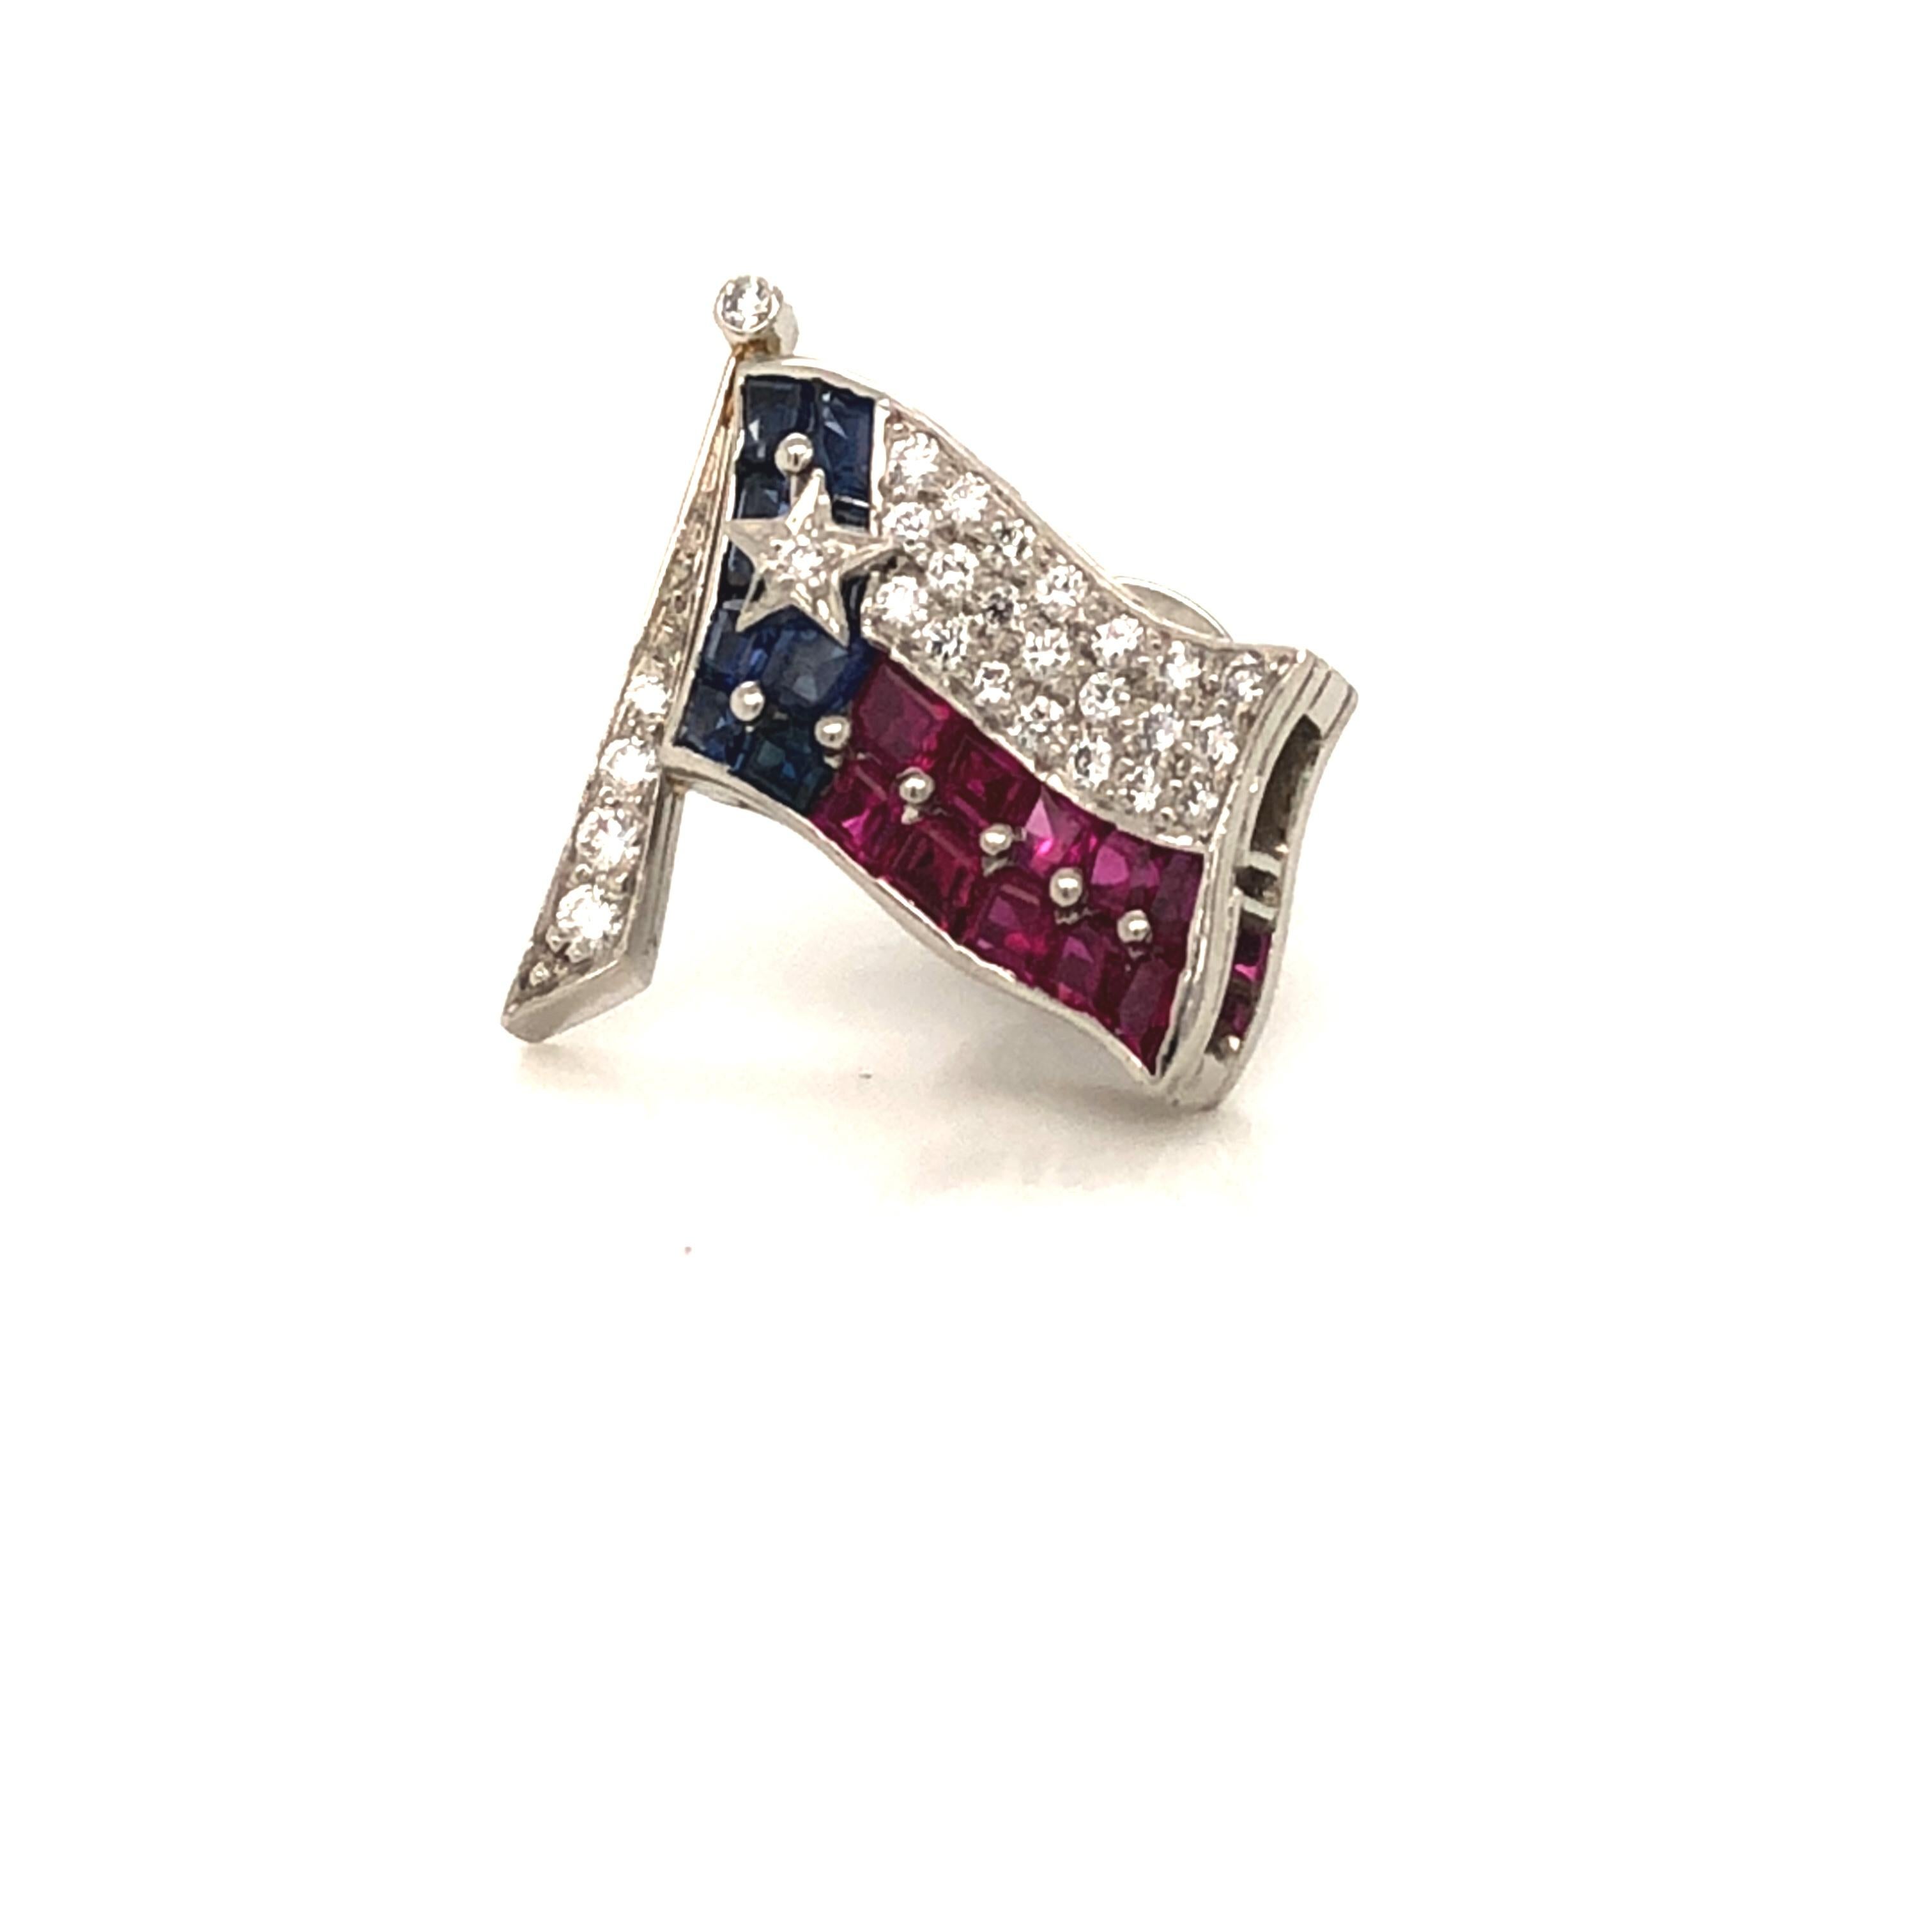 Oscar Heyman platinum Texas Flag lapel pin contains rubies (0.55cts), sapphires (0.54cts) and diamonds (0.21cts). It is stamped with the makers mark, IRID PLAT, and serial number 902816.

Flag pole is 18mm in length, 16mm in width.

Oscar Heyman was